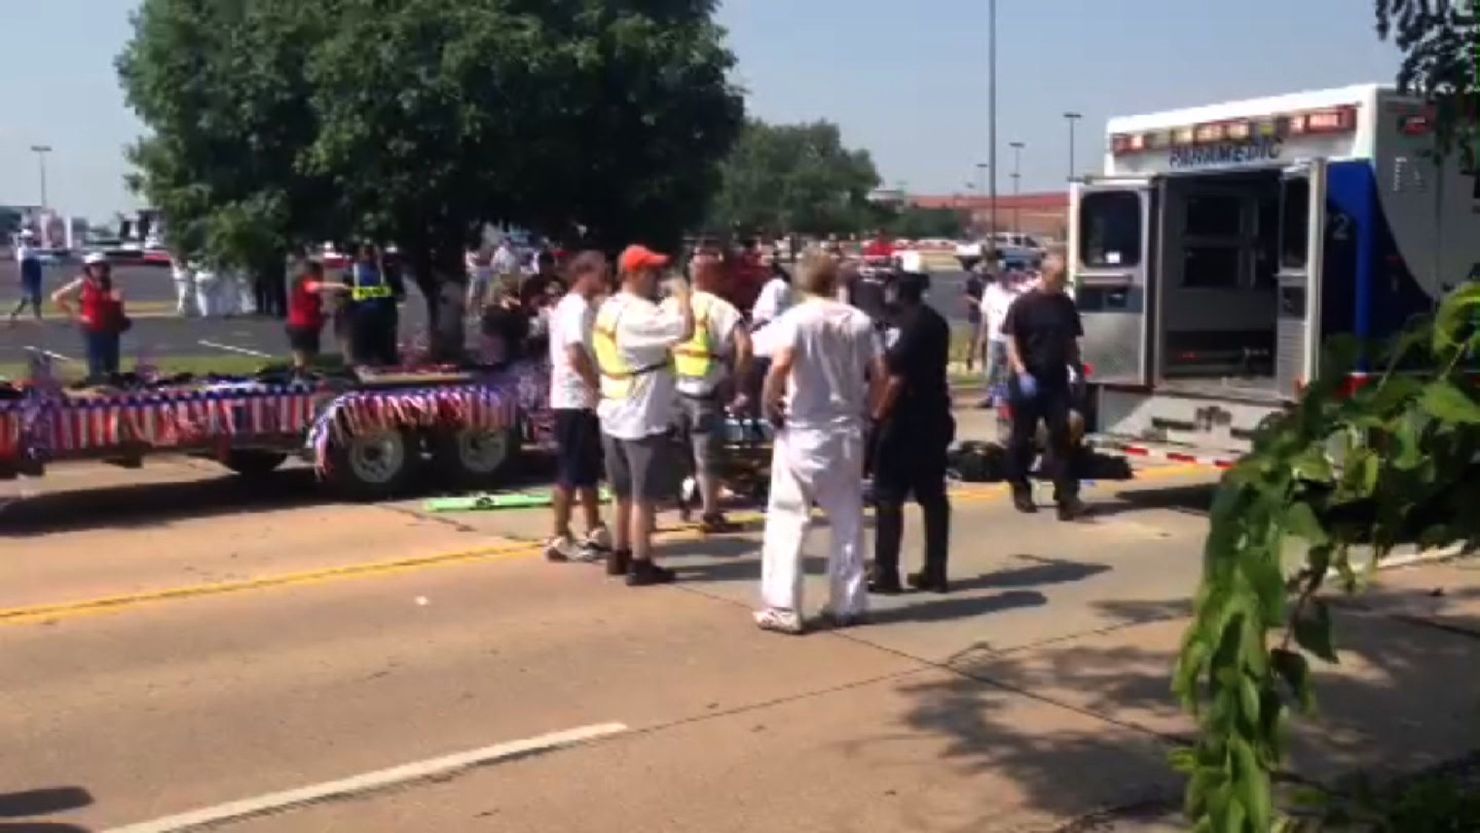 A boy died Thursday in an accident at a Fourth of July parade in Edmond, Oklahoma.